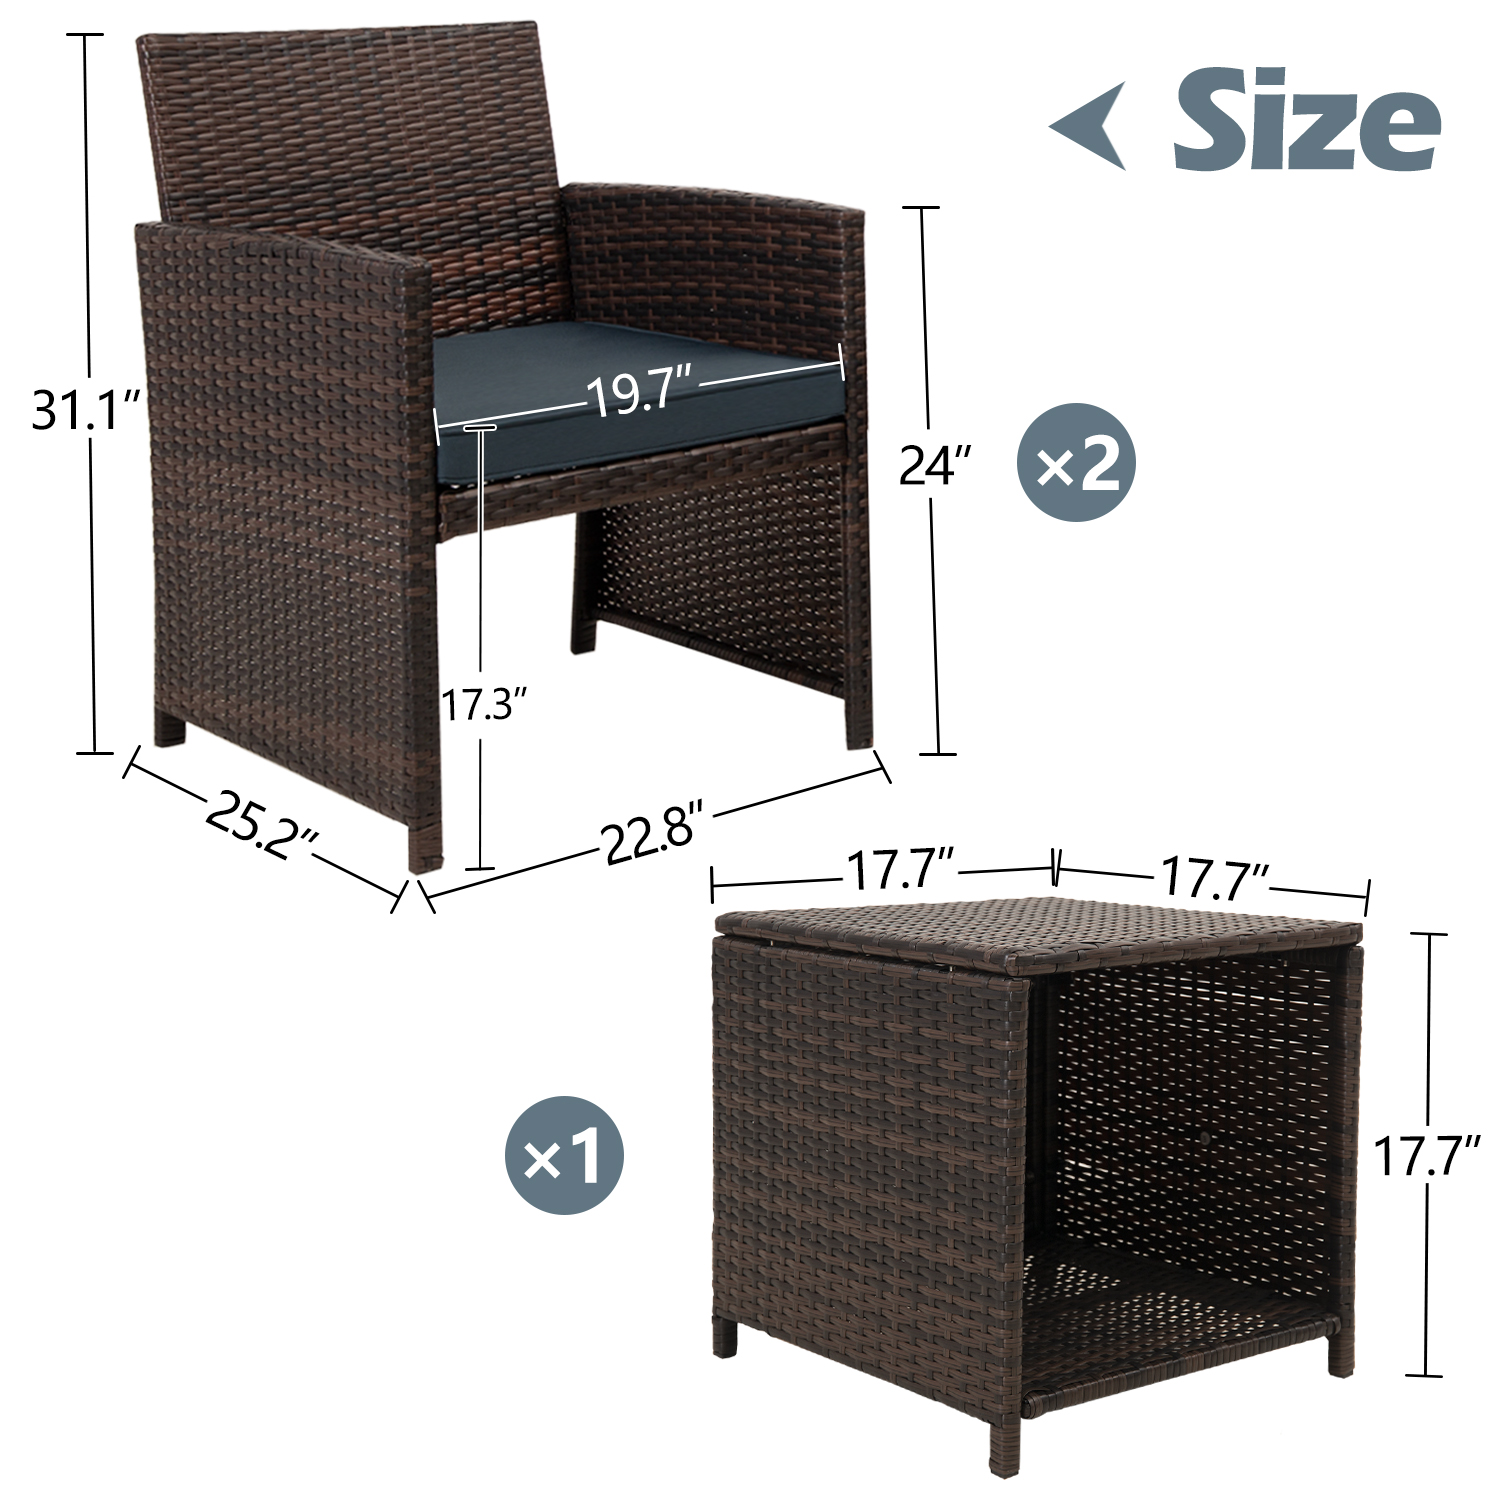 3-Piece Outdoor Bistro Set, enyopro PE Rattan Conversation Chairs Set, Patio Wicker Furniture Set, Contemporary Deck Furniture Sectional Set, Outdoor Chat Set for Backyard Porch Sunroom, JA3115 - image 3 of 7